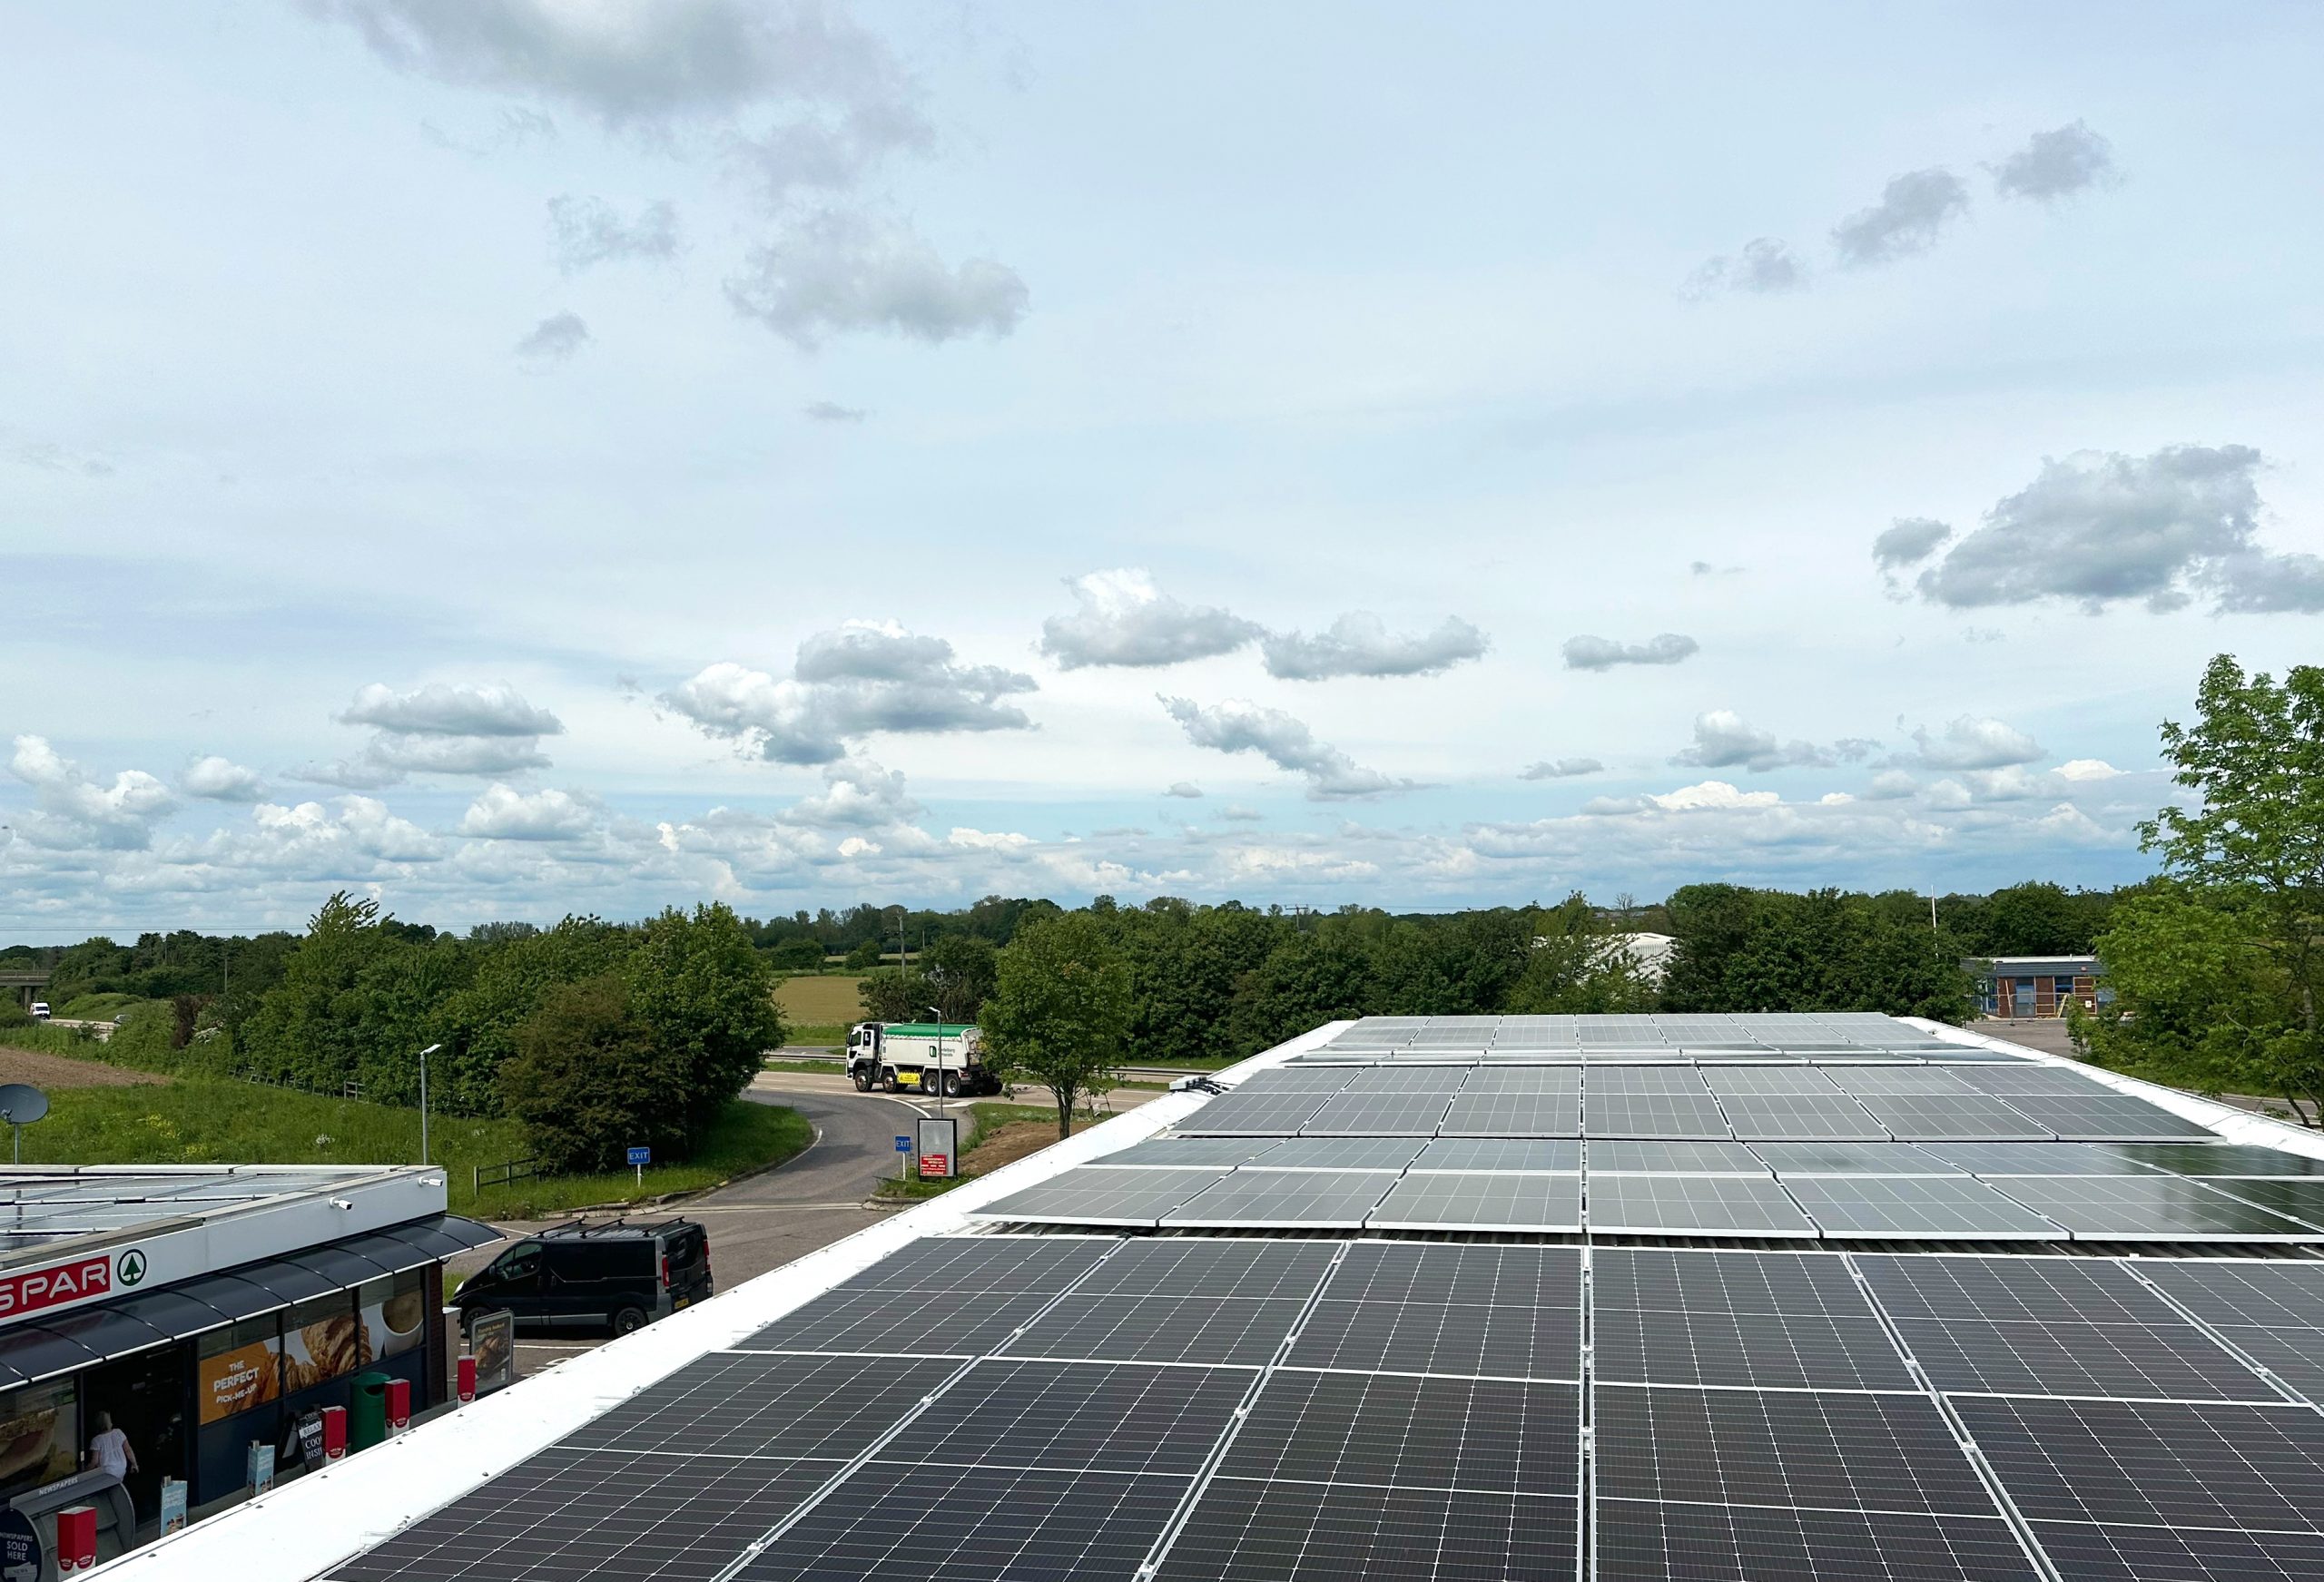 Commercial Solar Panels (PV) installed on a Petrol Station by Ingeni Renewables